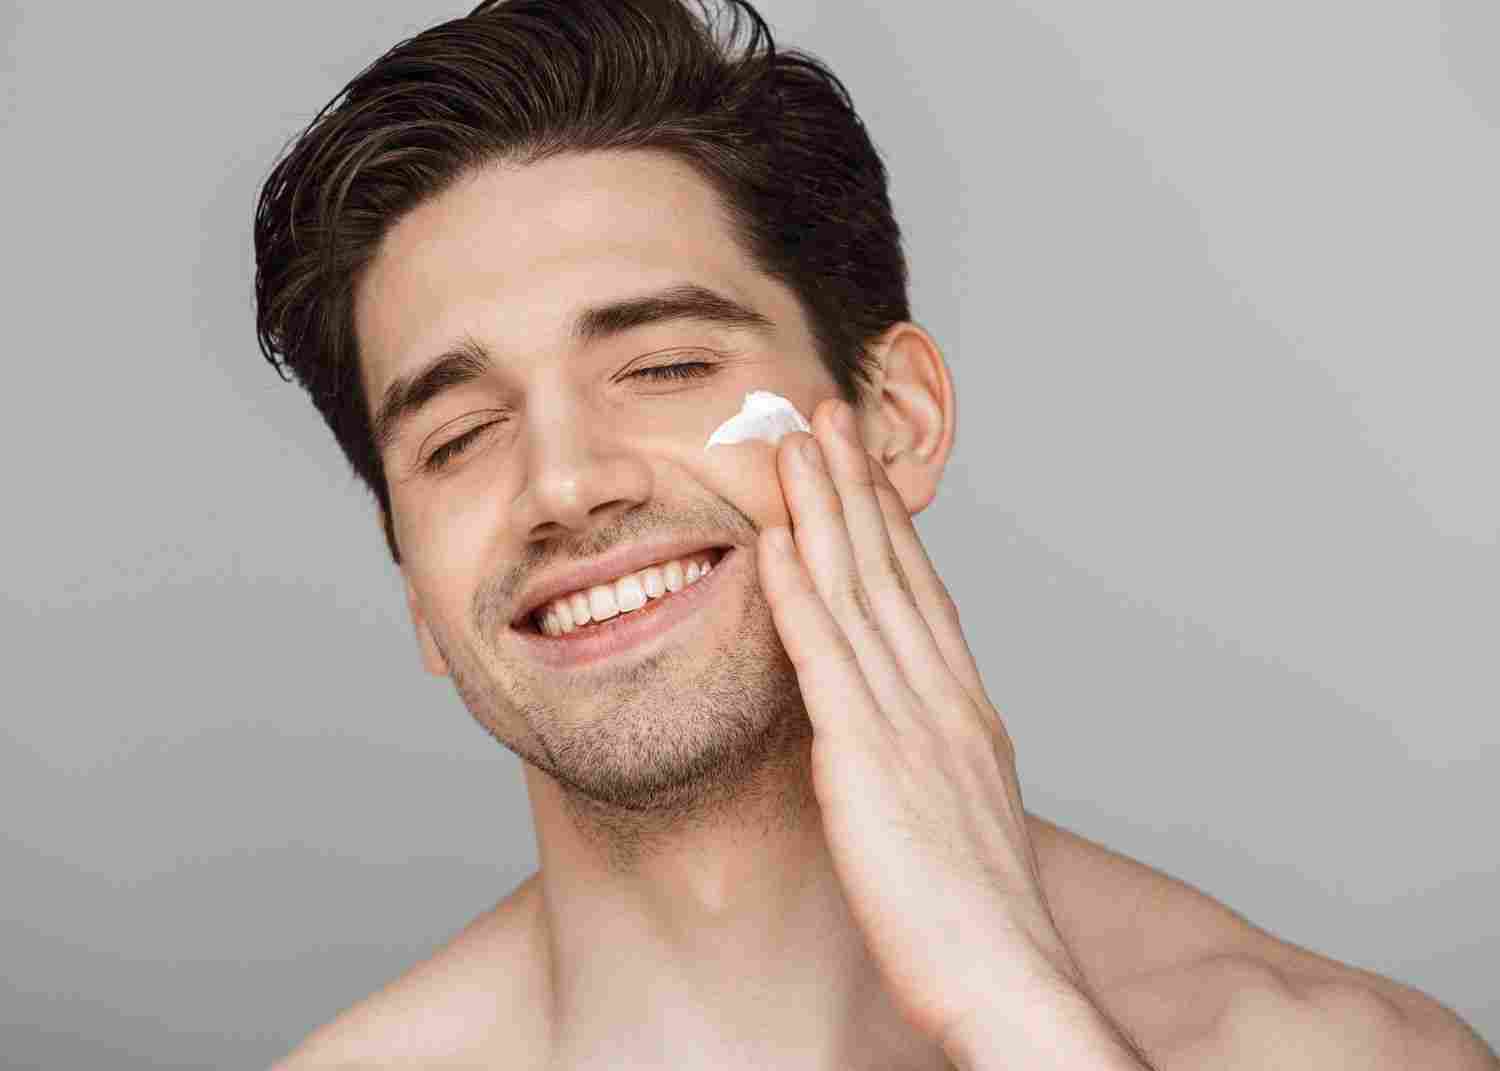 Facial Hair Care Tips Every Guy Should Know